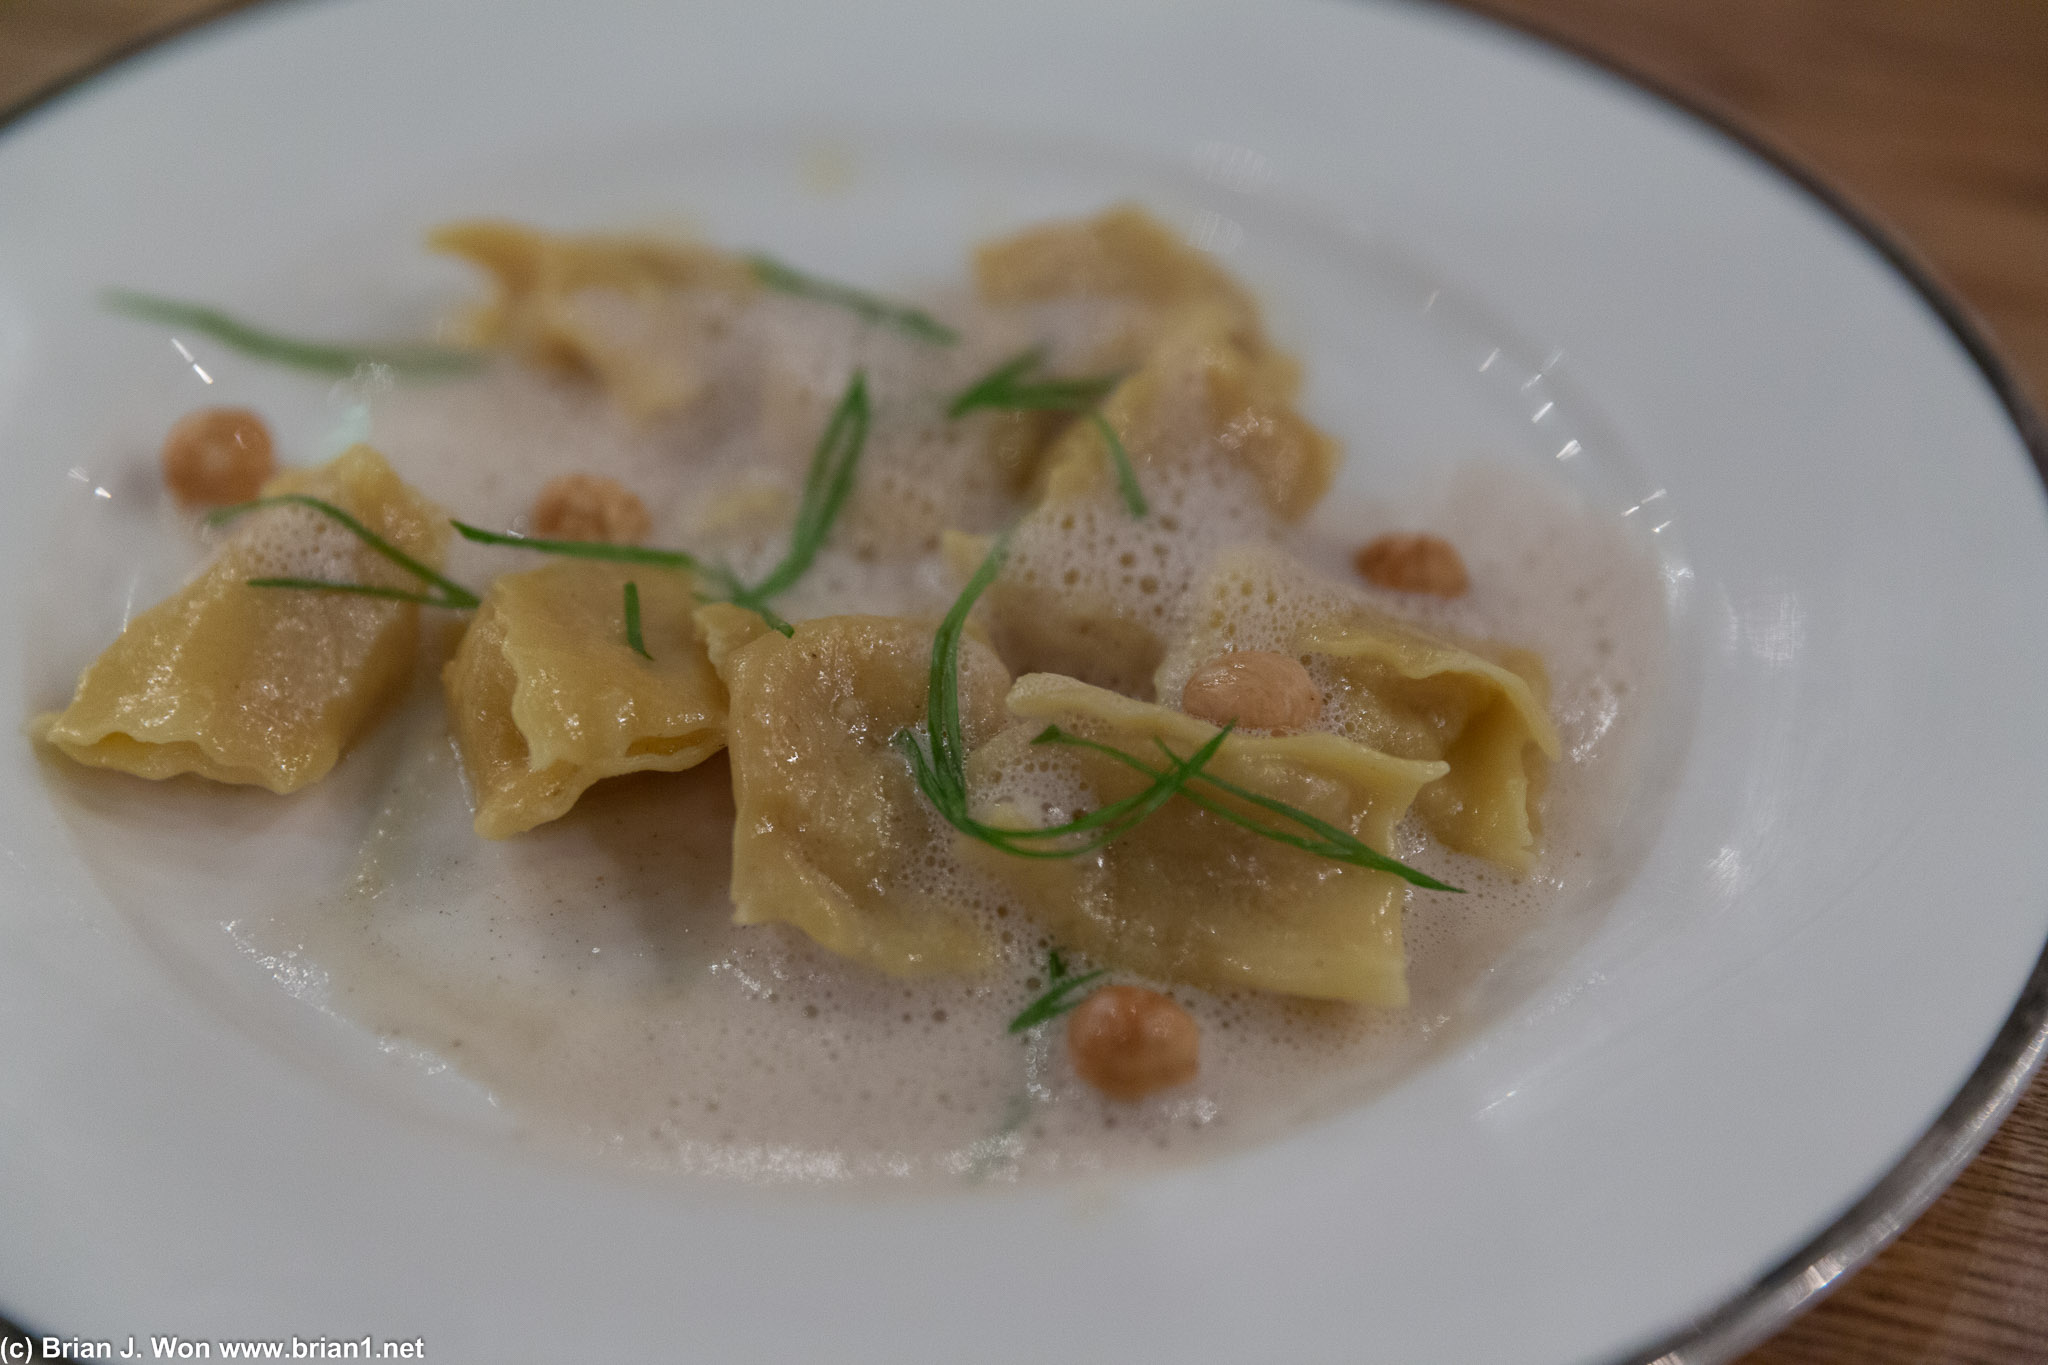 Sweet corn agnolotti. As someone who doesn't care for vegetarian dishes, this was again-- holy crap, amazing.